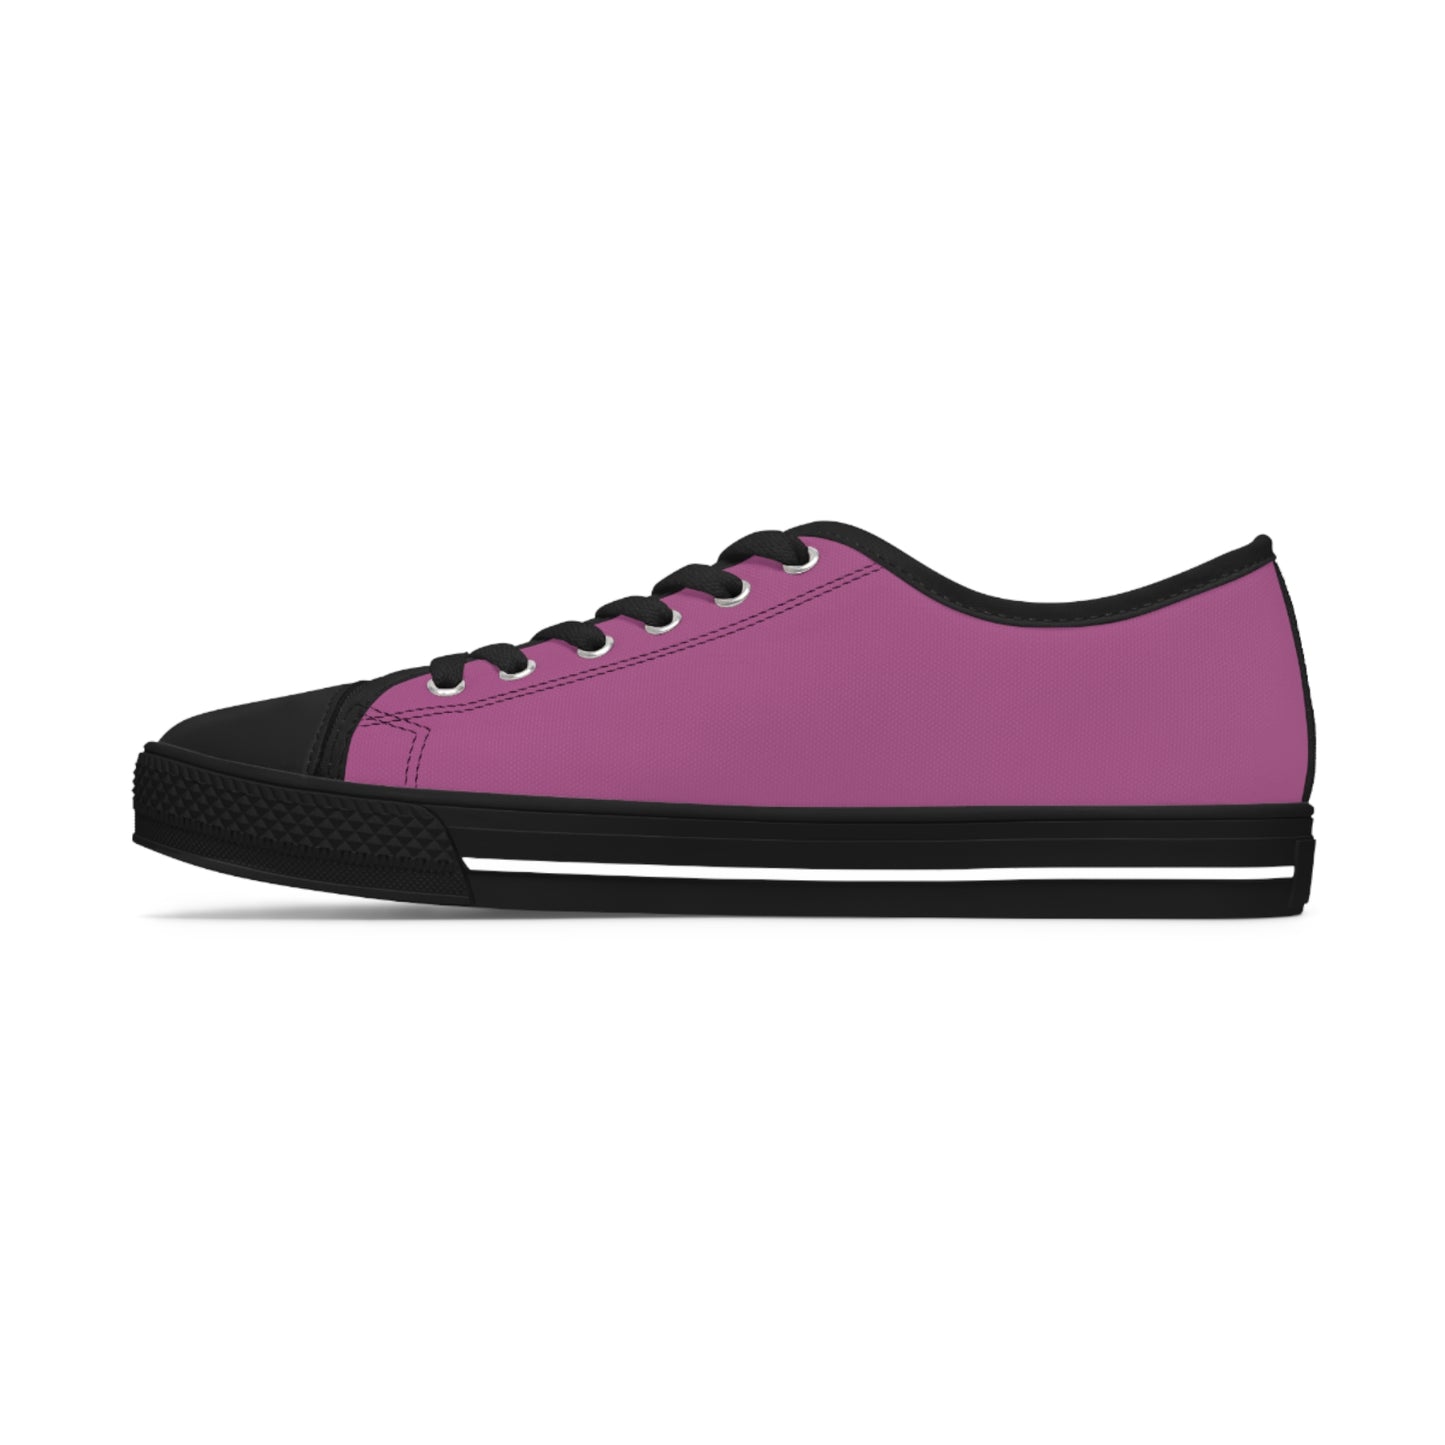 Women's Canvas Low Top Solid Color Sneakers - Candy Wrapper Pink US 12 White sole